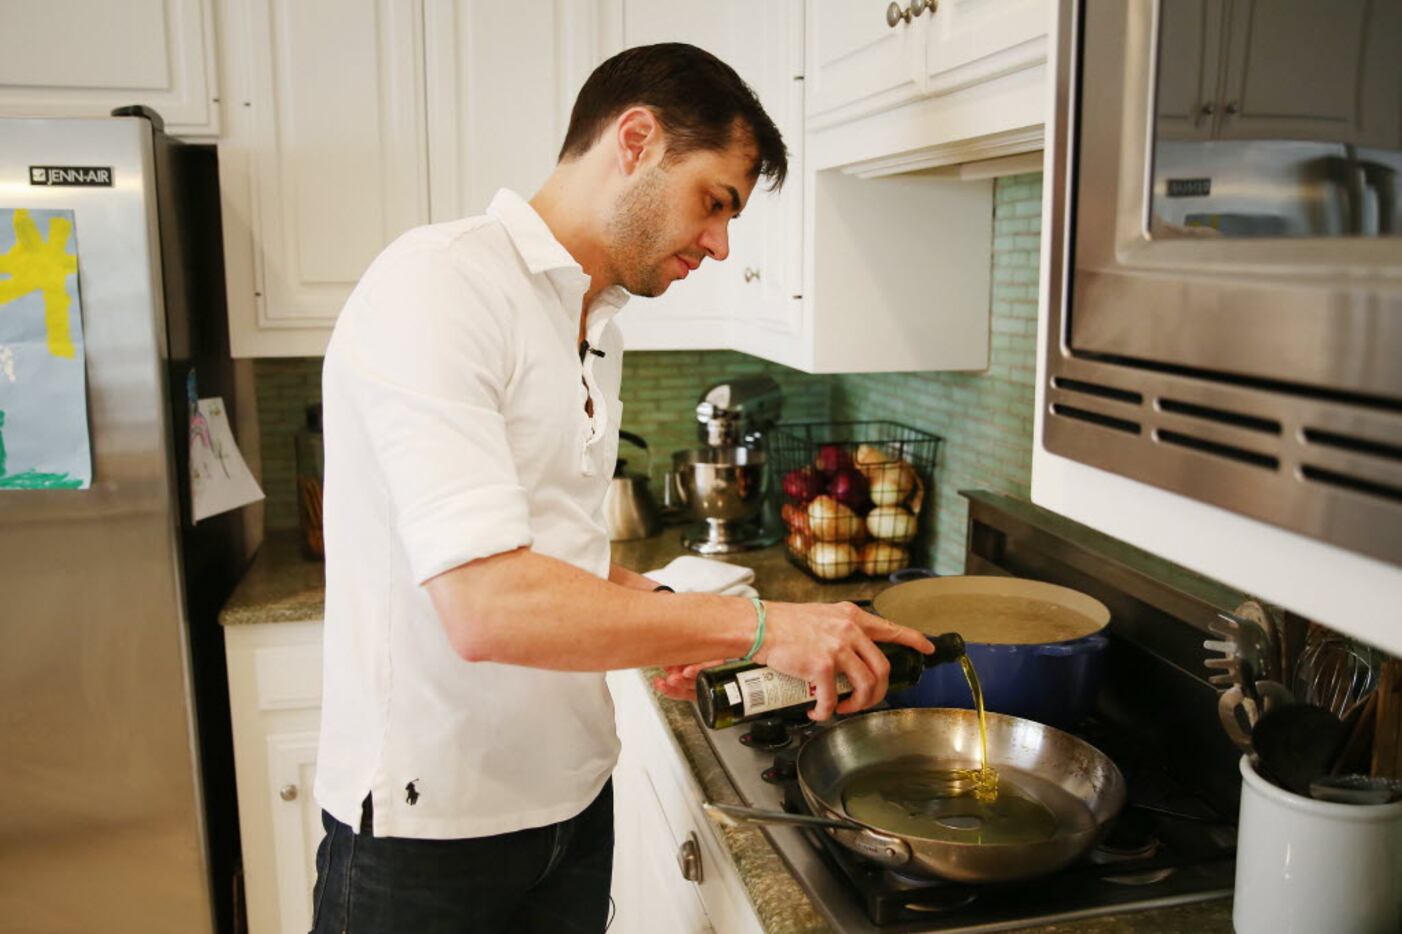 Chef Julian Barsotti adds oil to a pan while cooking a pasta dish at his home in Dallas.